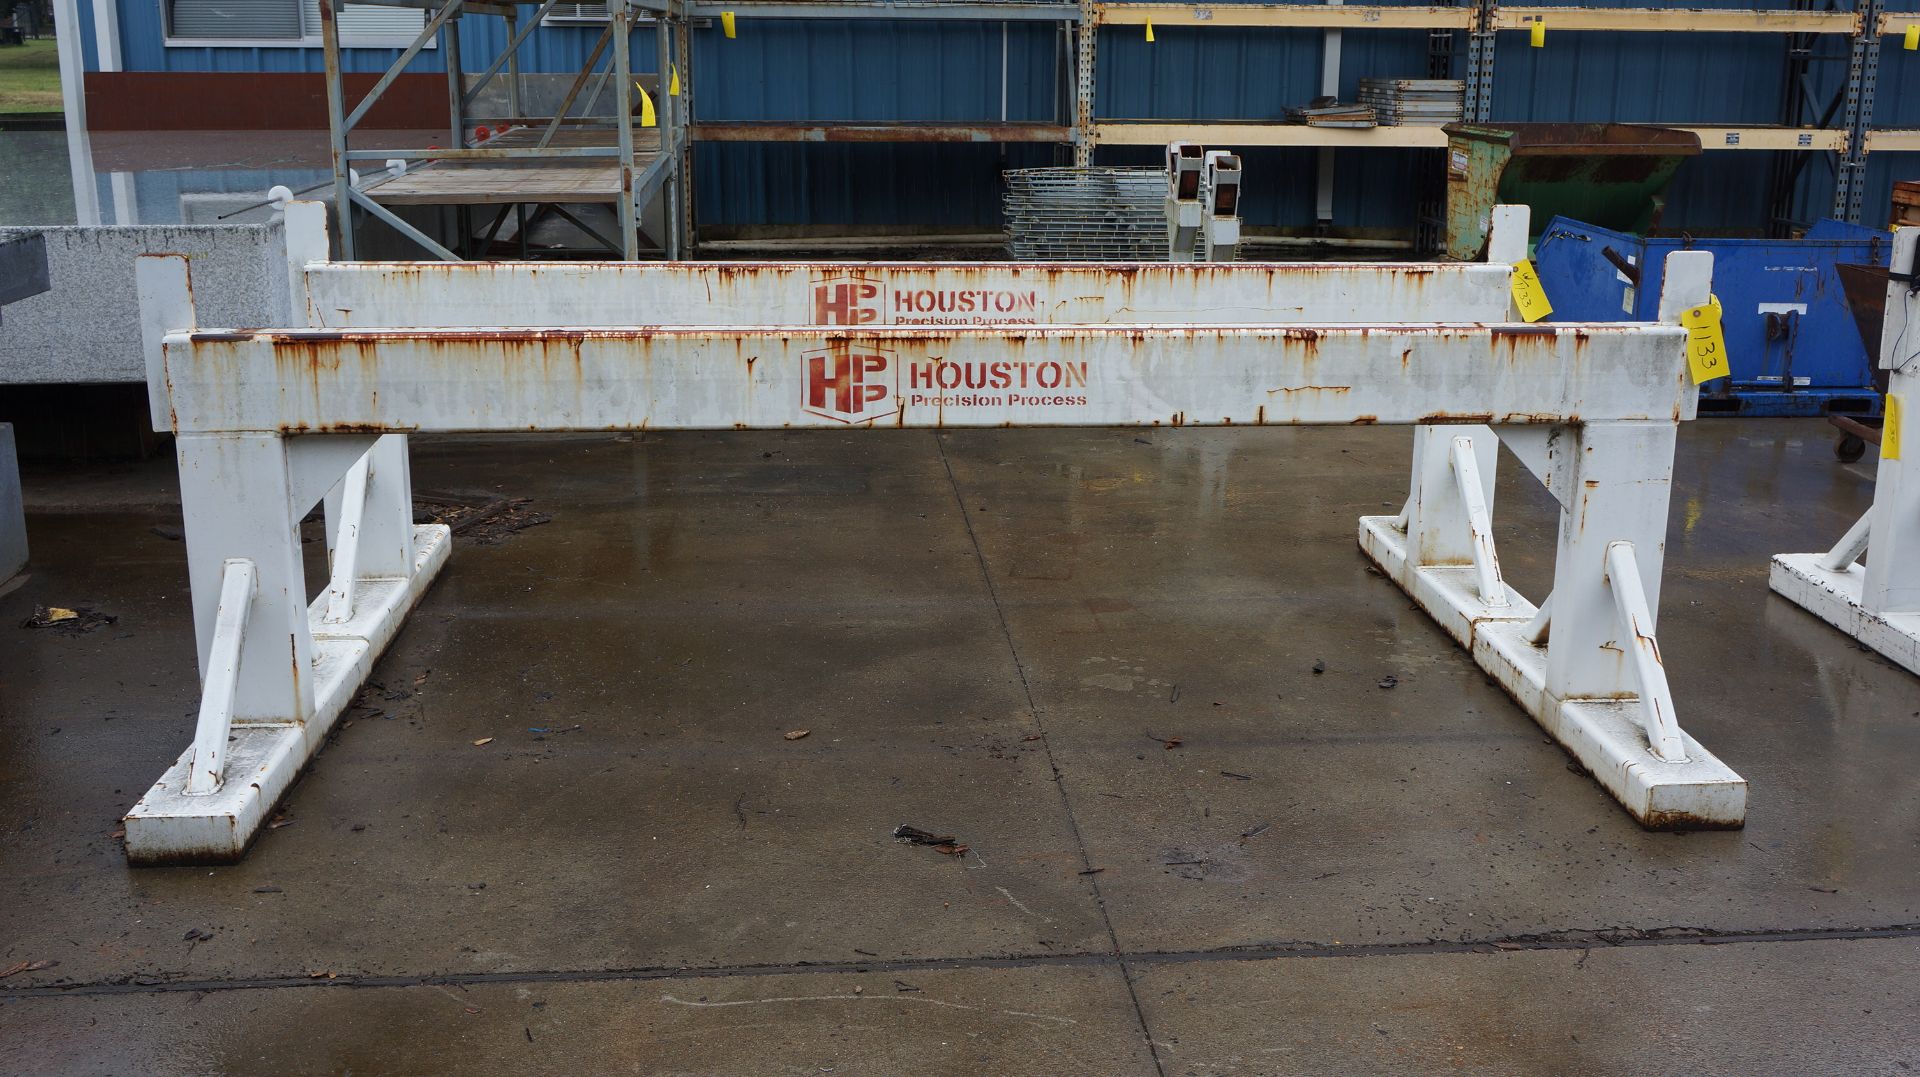 LOT OF METAL STANDS (2), HOUSTON PRECISION PROCESS, 36" ht. x 10'L.